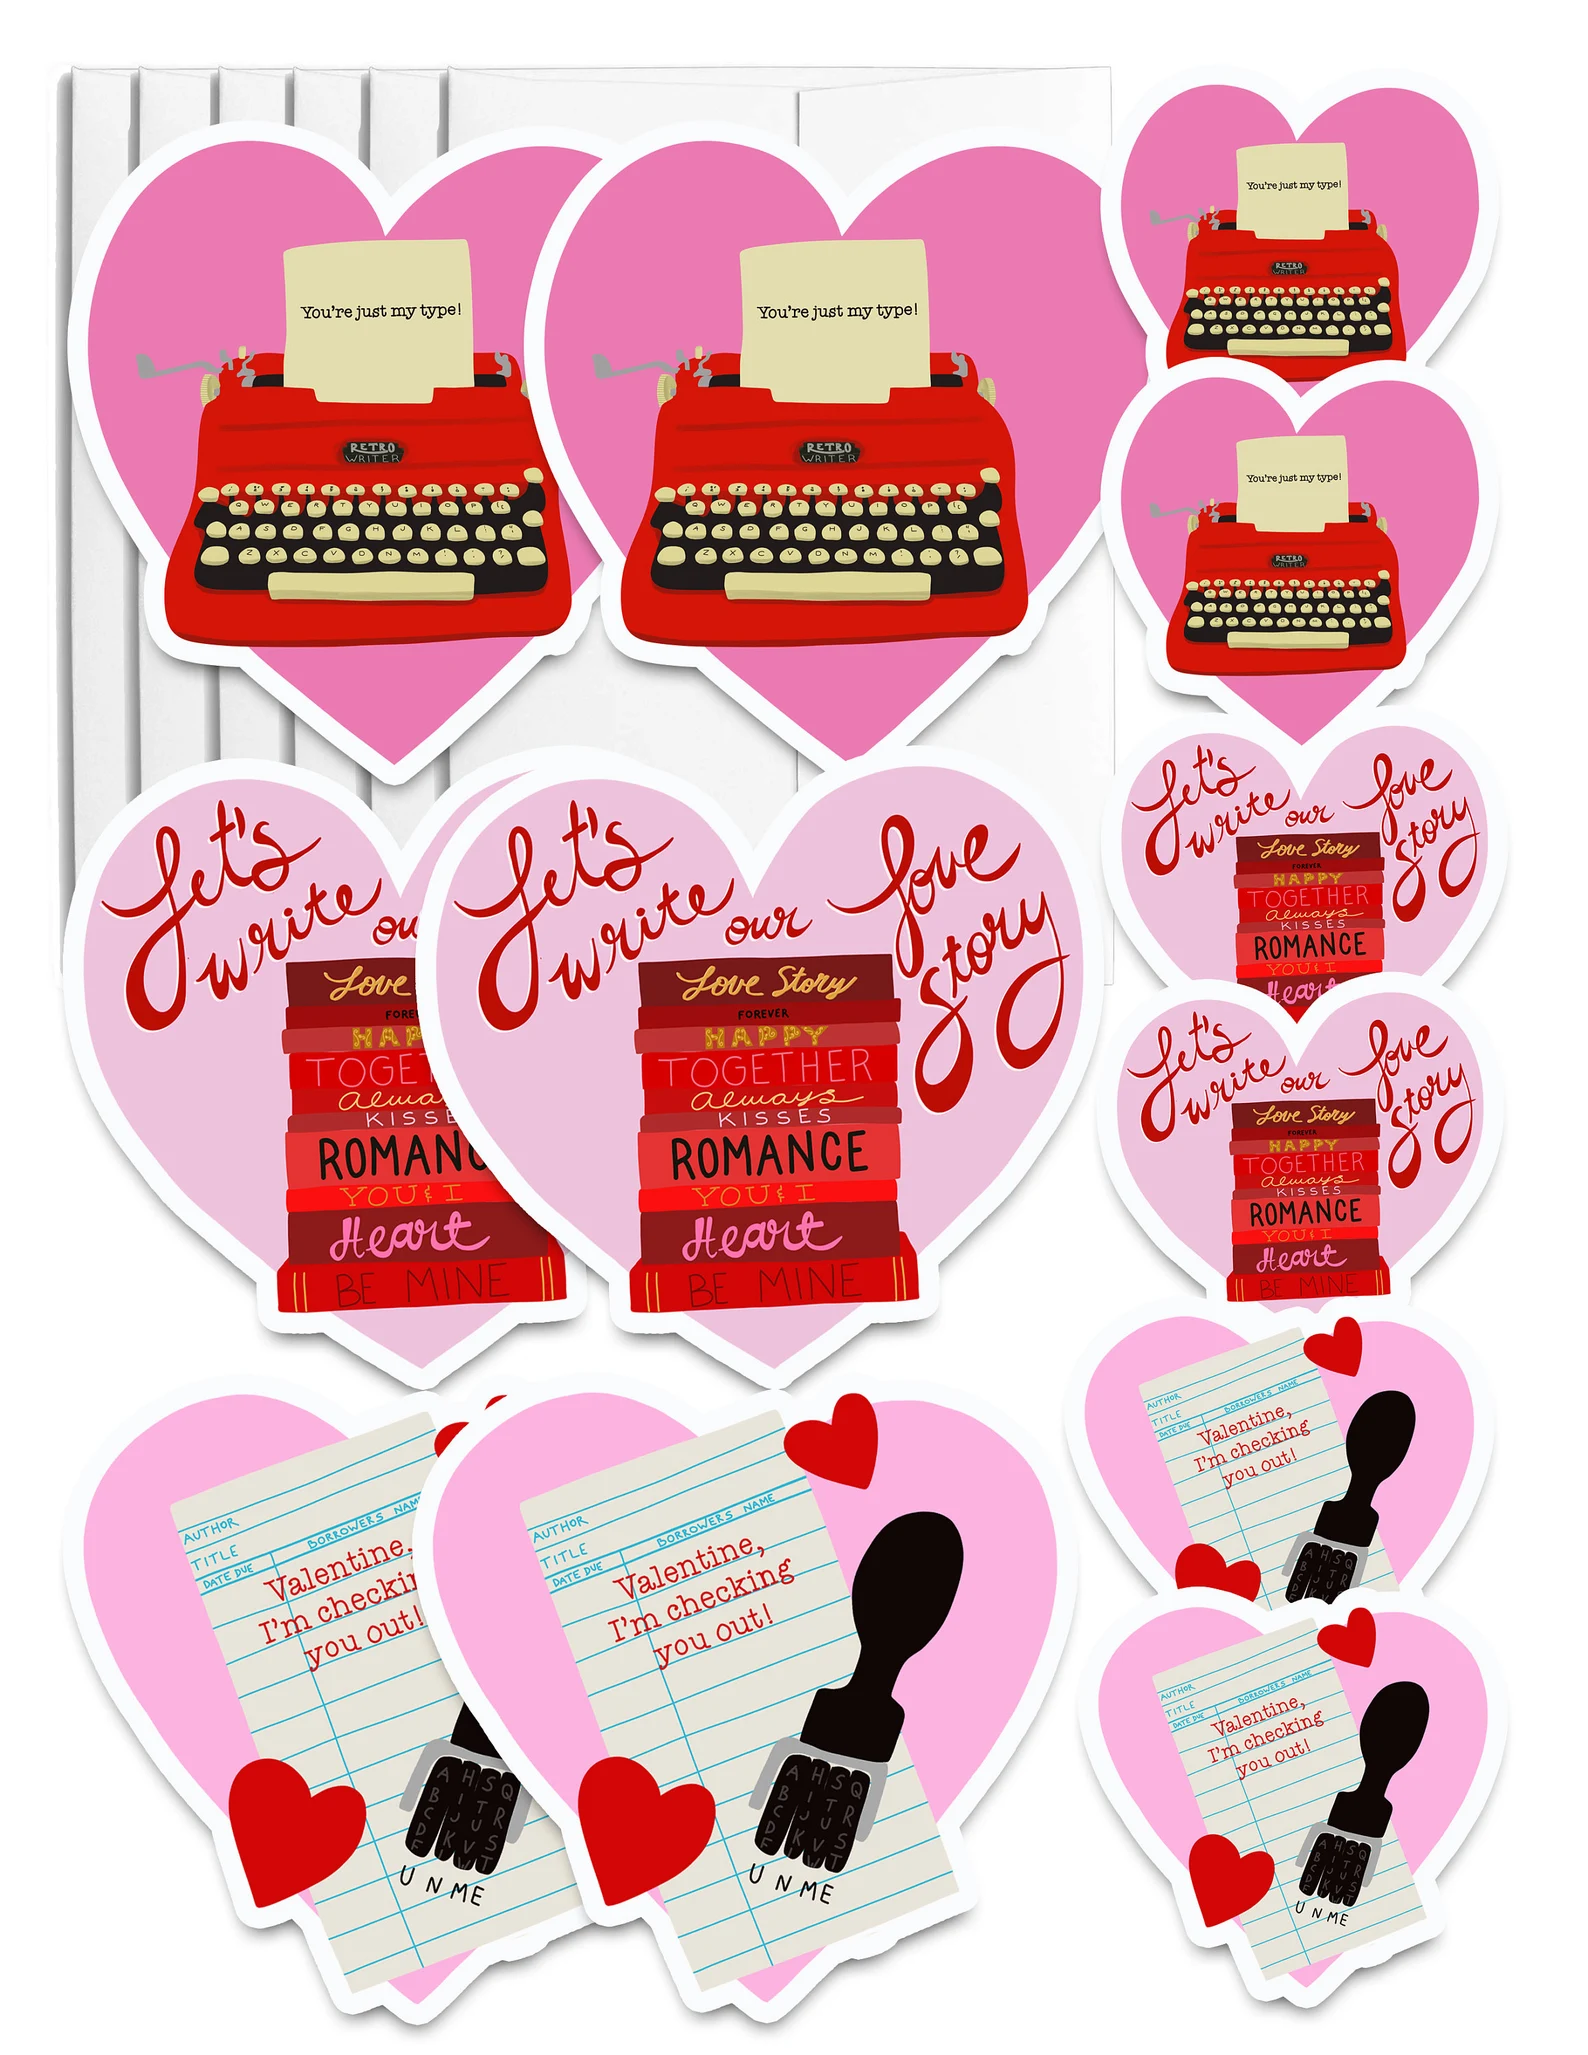 A set of six heart-shaped valentines with a typewriter, stack of books, and library card, along with stickers and envelopes.